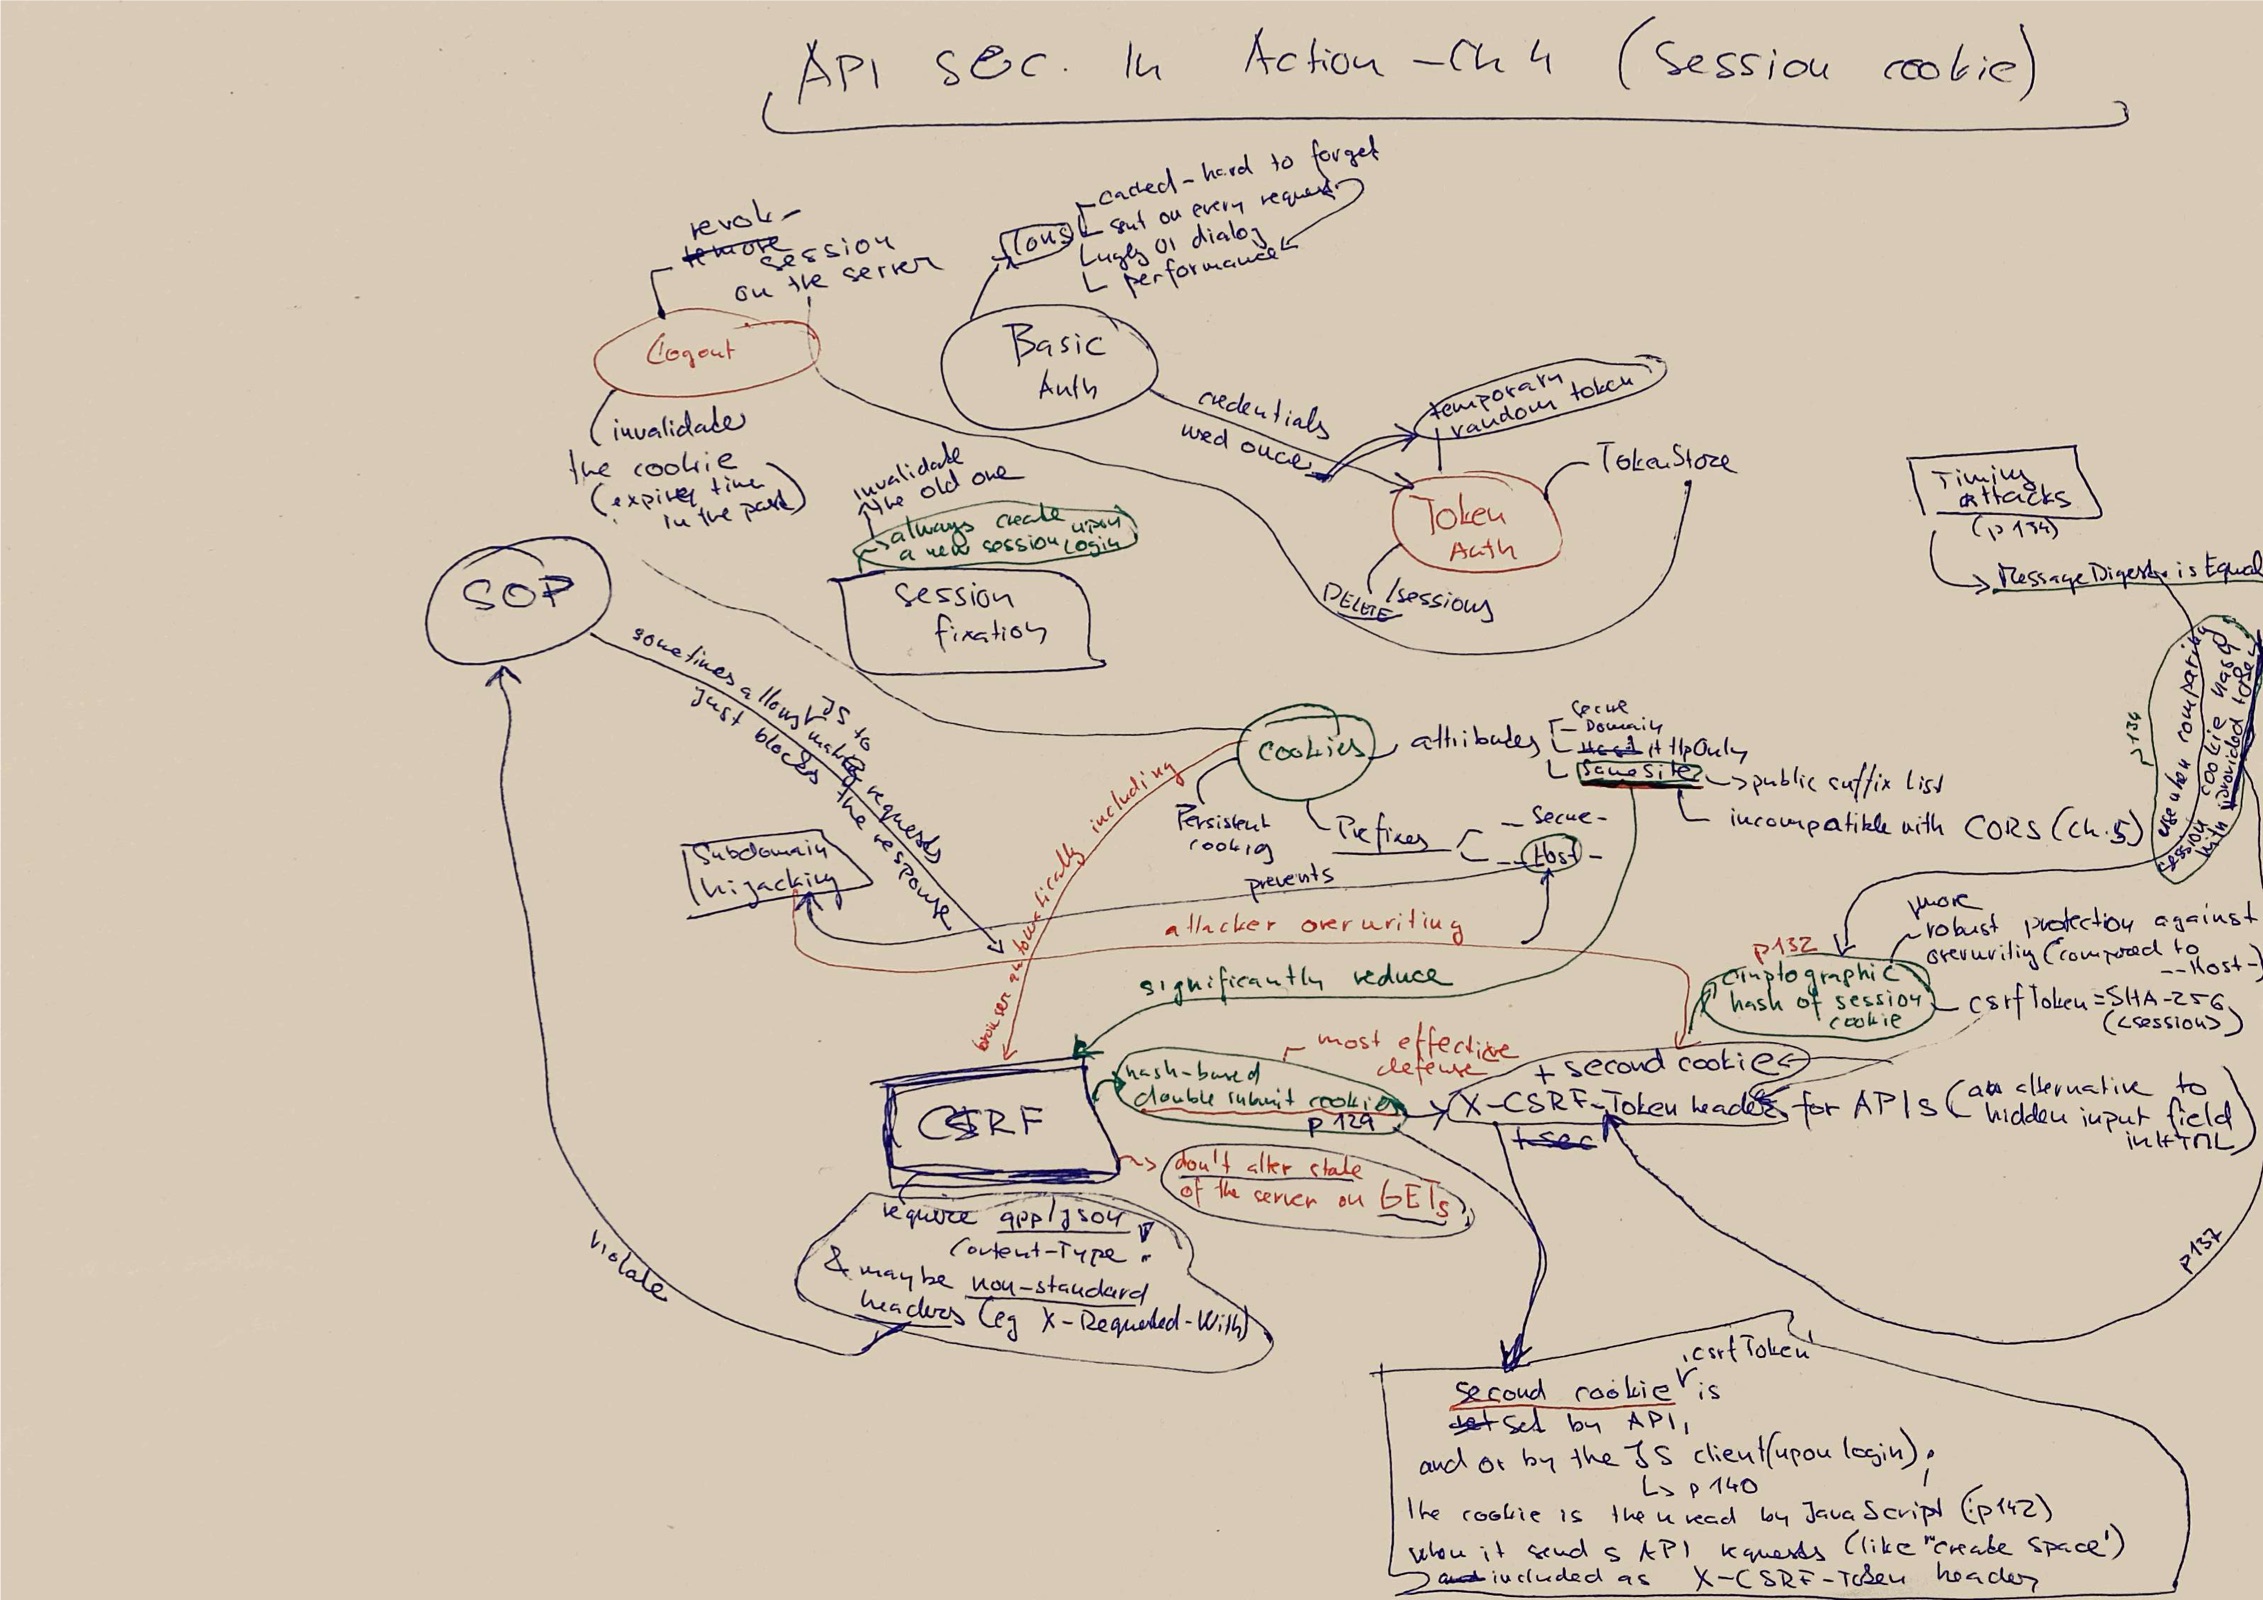 Api Security in Action - Mindmap for Chapter 4